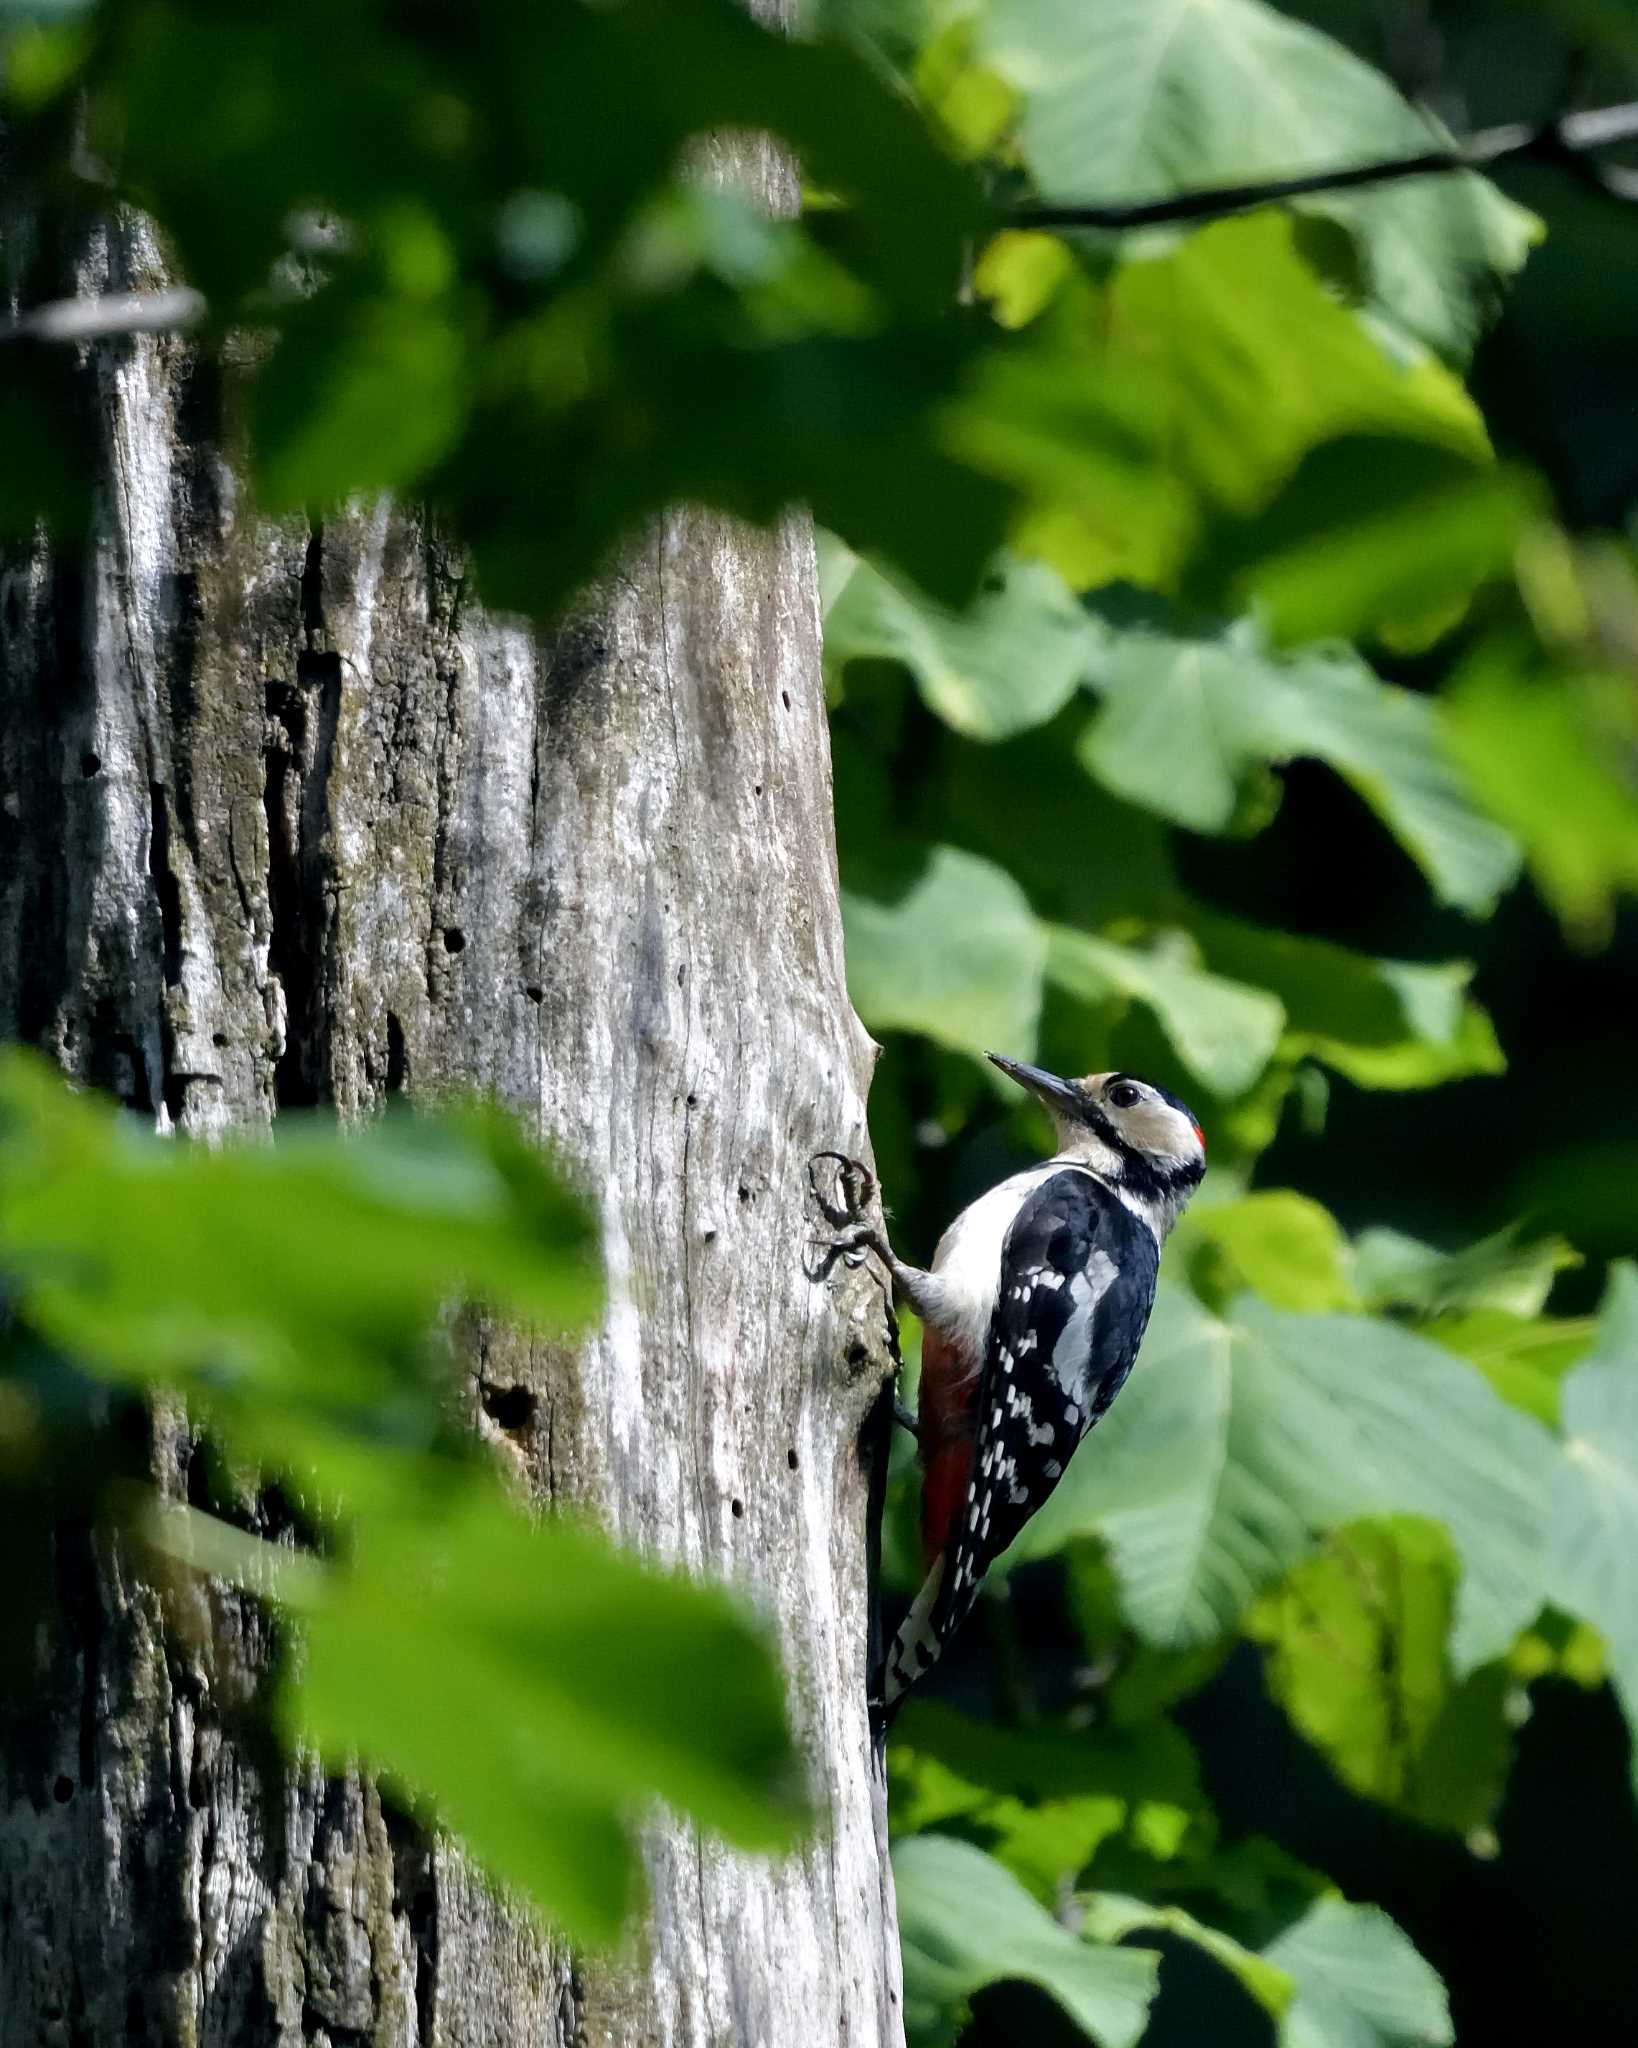 Photo of Great Spotted Woodpecker at Tamahara Wetland by ちびすけ